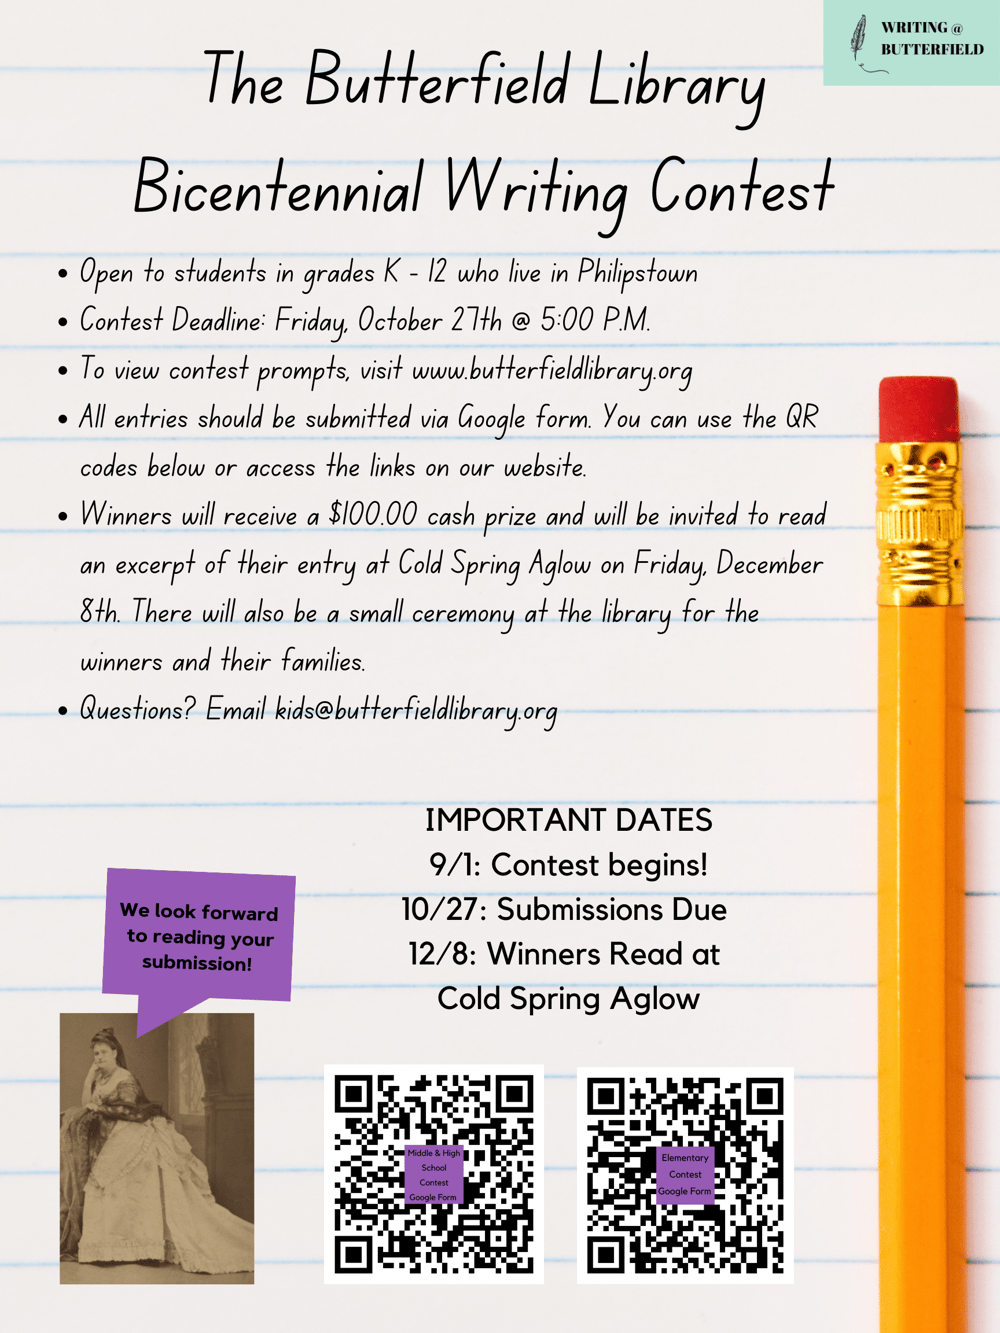 The Butterfield LibraryBicentennial Writing ContestOpen to students in grades K - 12 who live in PhilipstownContest Deadline: Friday, October 27th @ 5:00 P.M.To view contest prompts, visit www.butterfieldlibrary.orgAll entries should be submitted via Google form. You can use the QR codes below or access the links on our website.Winners will receive a $100.00 cash prize and will be invited to read an excerpt of their entry at Cold Spring Aglow on Friday, December 8th. There will also be a small ceremony at the library for the winners and their families. Questions? Email kids@butterfieldlibrary.org IMPORTANT DATES9/1: Contest begins!10/27: Submissions Due 12/8: Winners Read at Cold Spring Aglow